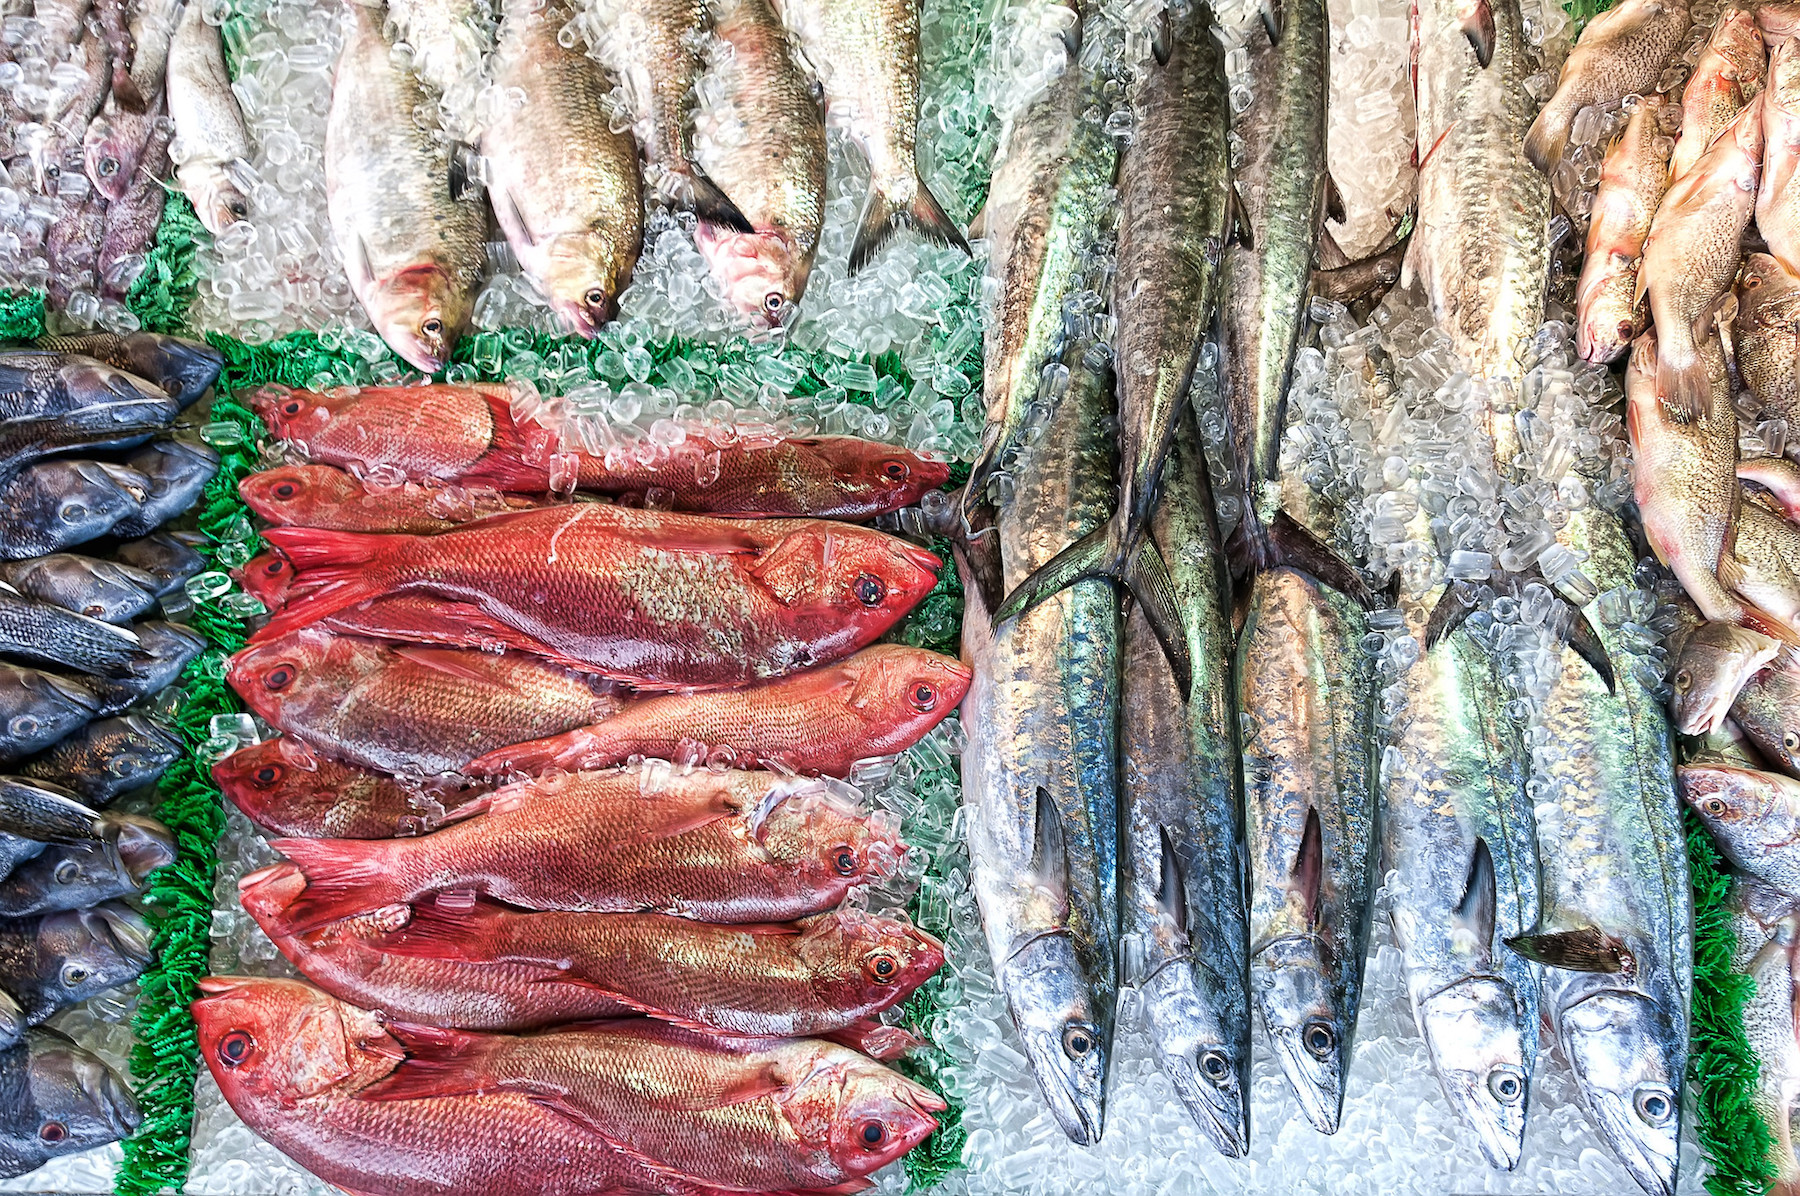 Hard to eat local when it comes to fresh seafood (May 2019)